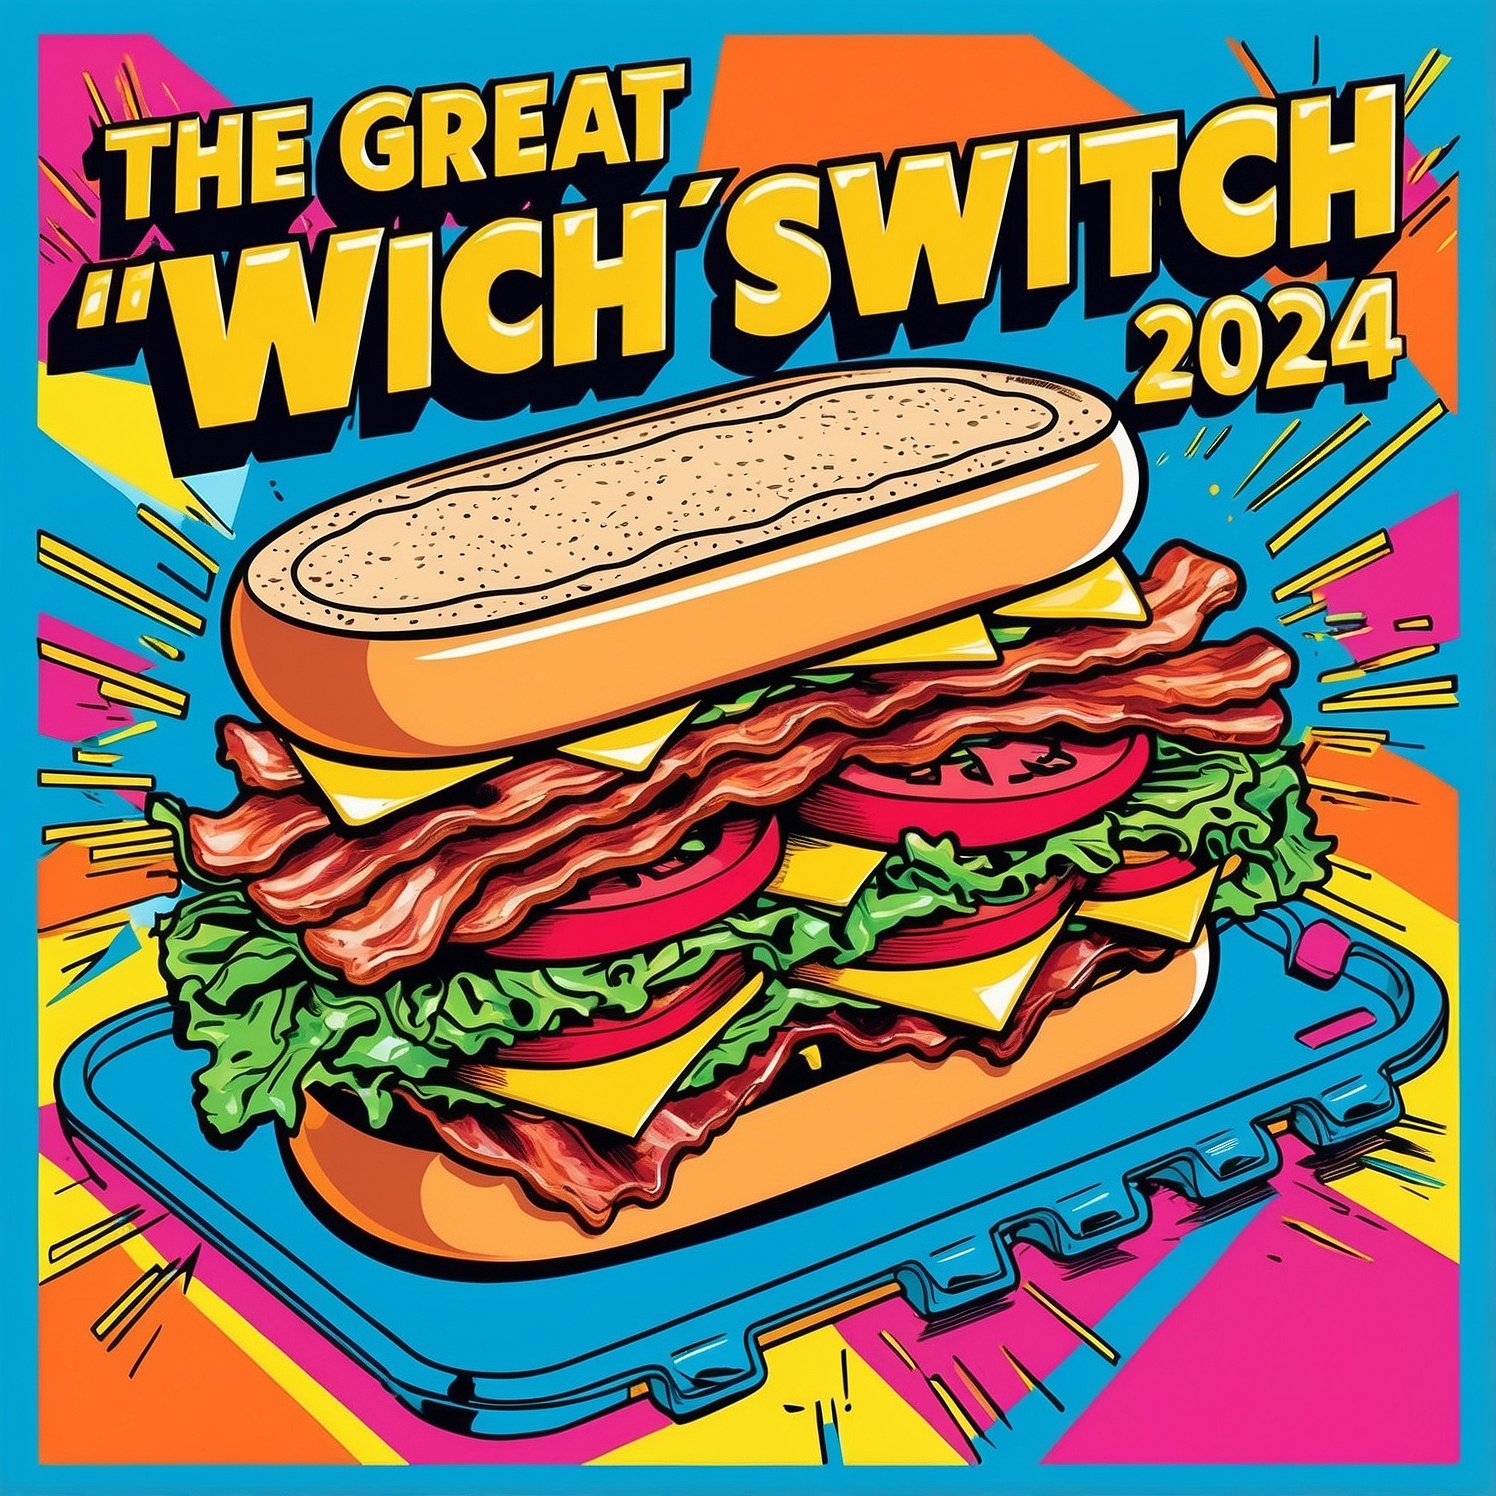 The Great 'wich Switch 2024